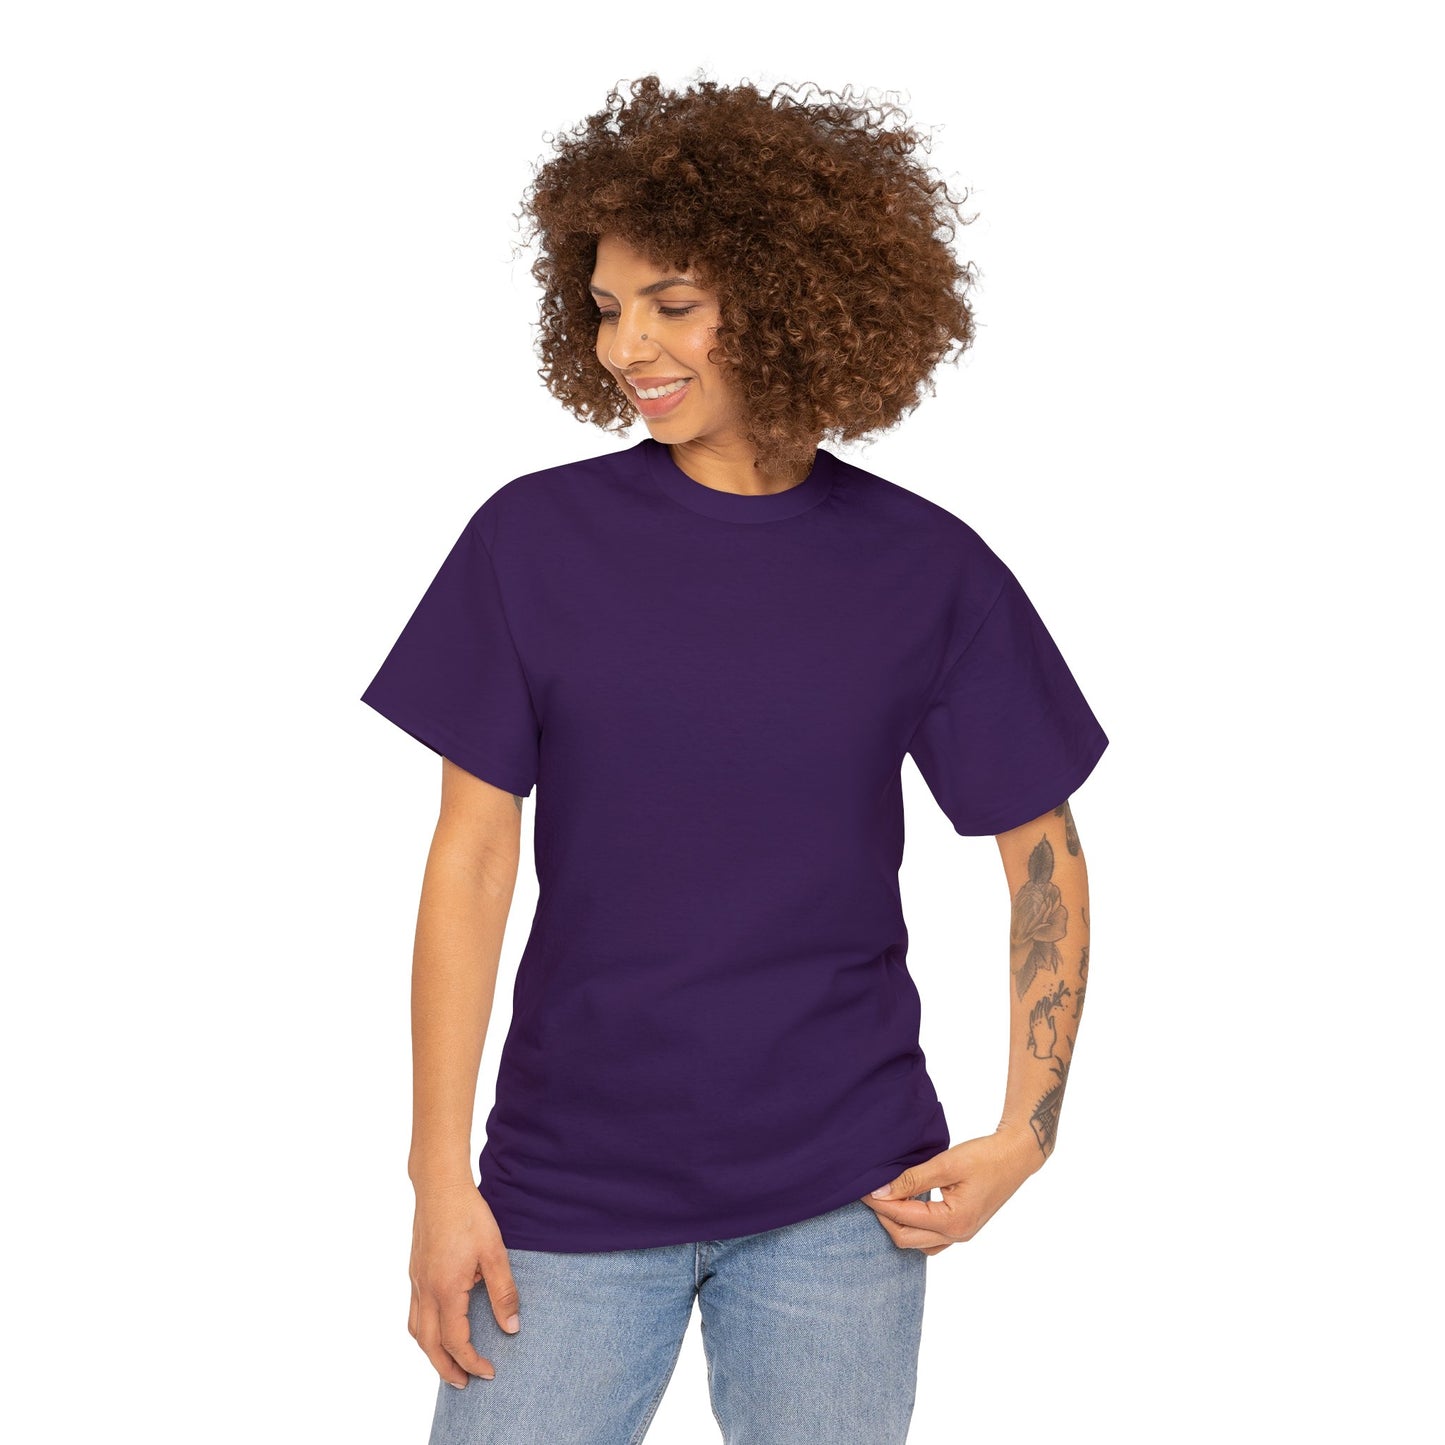 TOPOCK SMALL TOWN ON BACK  Unisex Heavy Cotton Tee